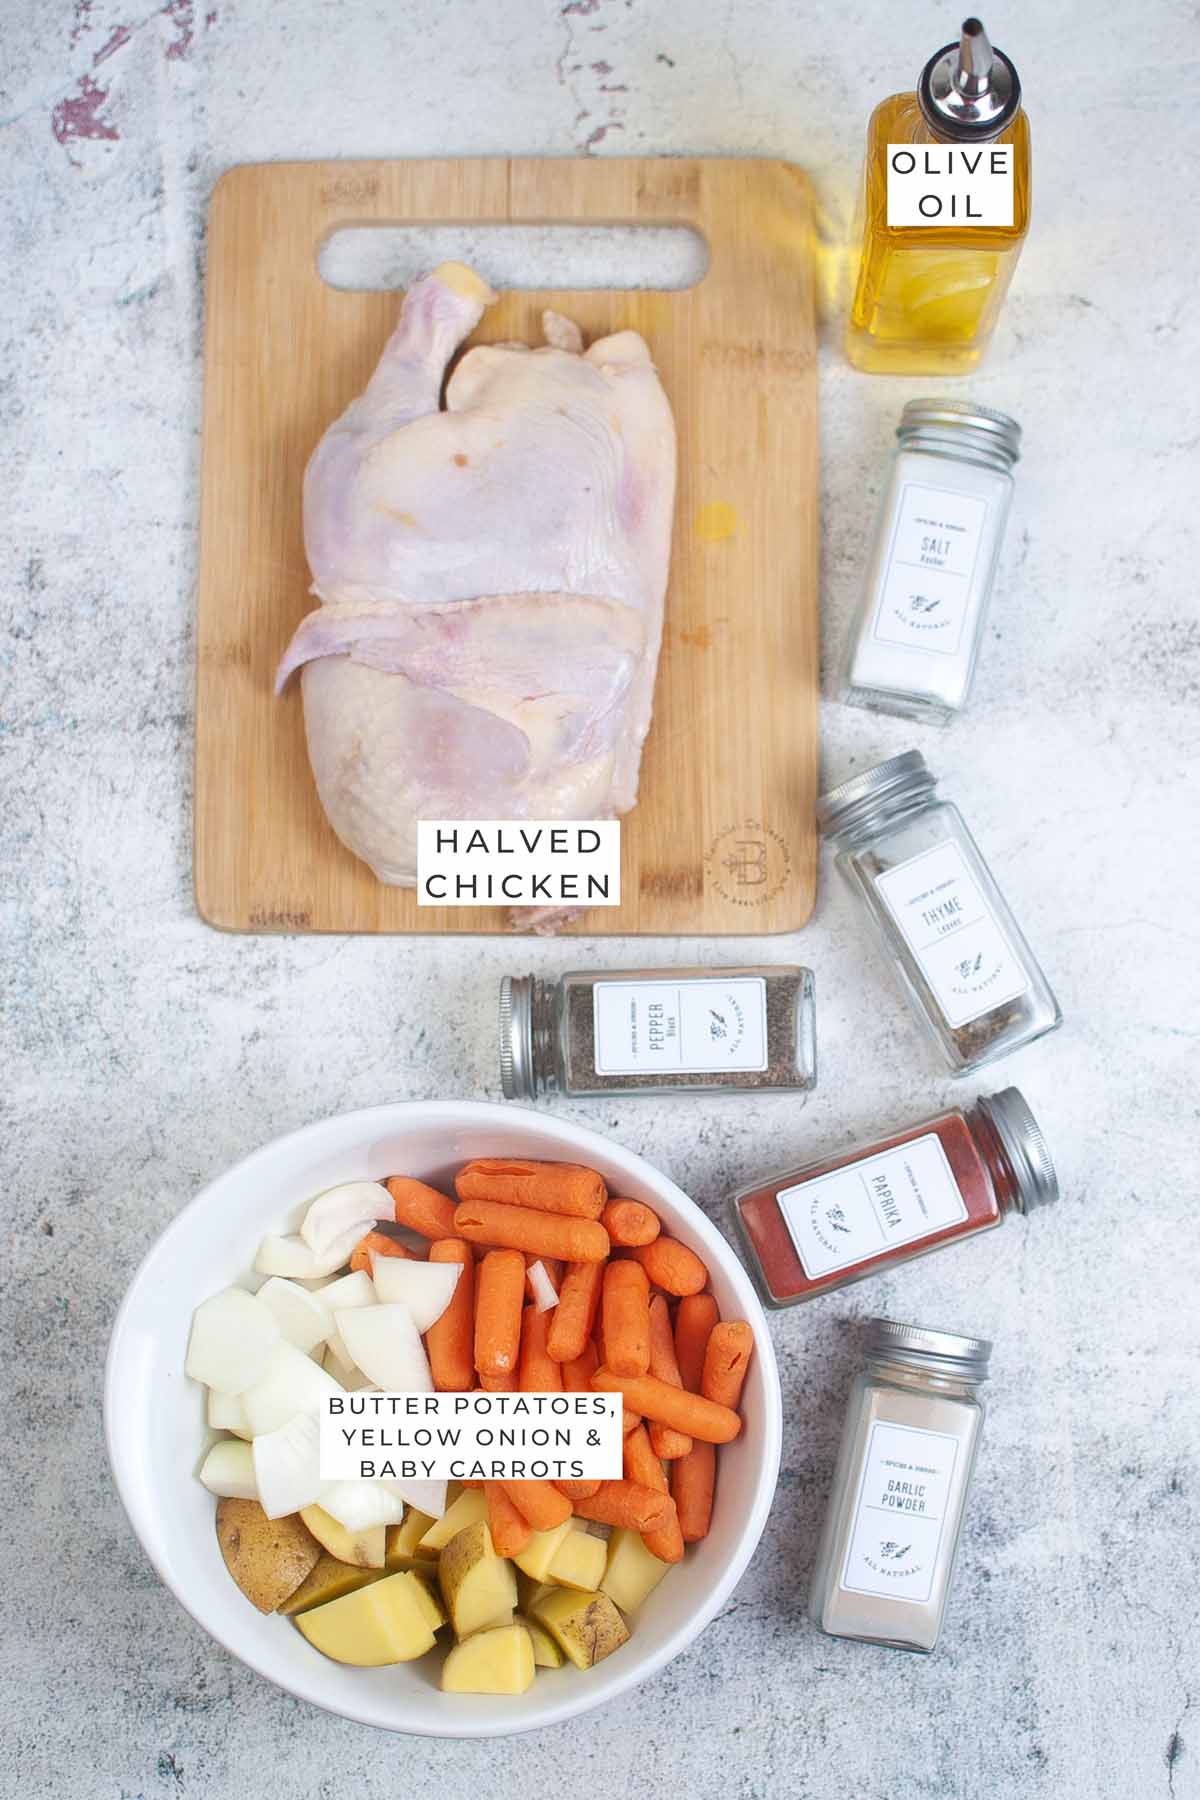 Labeled ingredients for the half chicken.